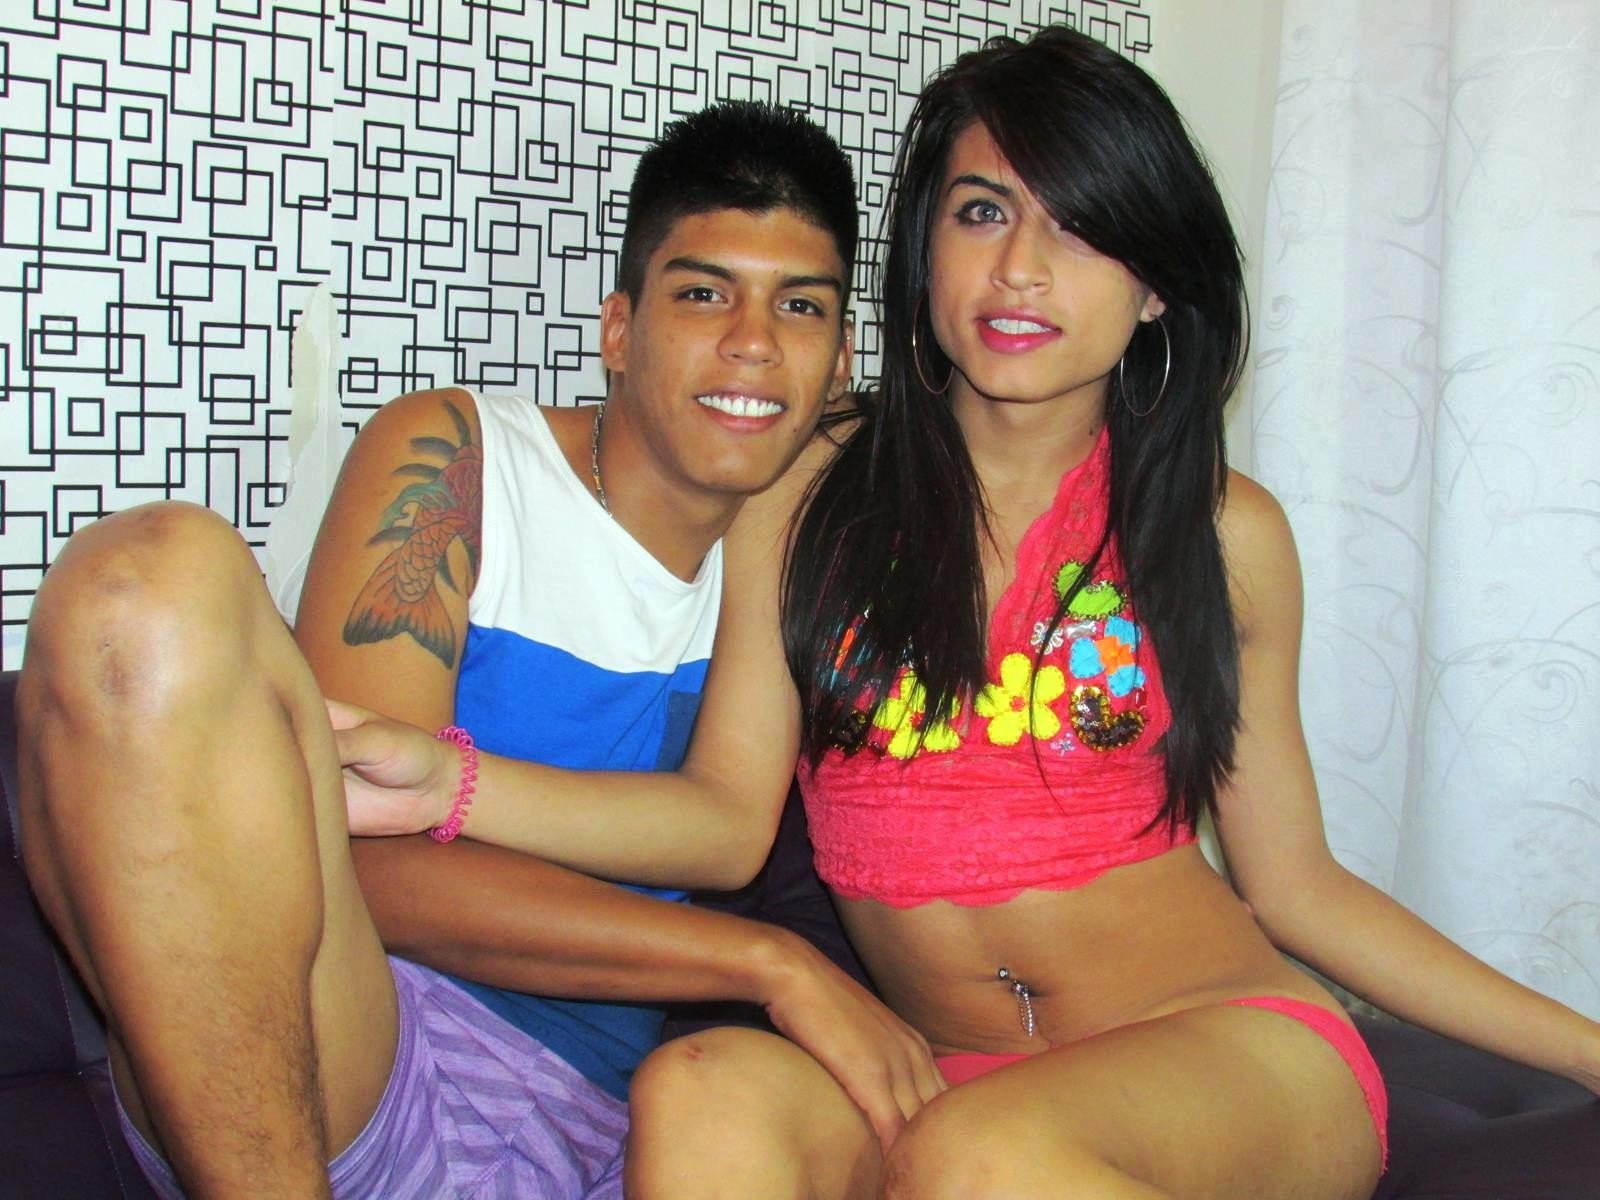 Transsexual couple having good time image